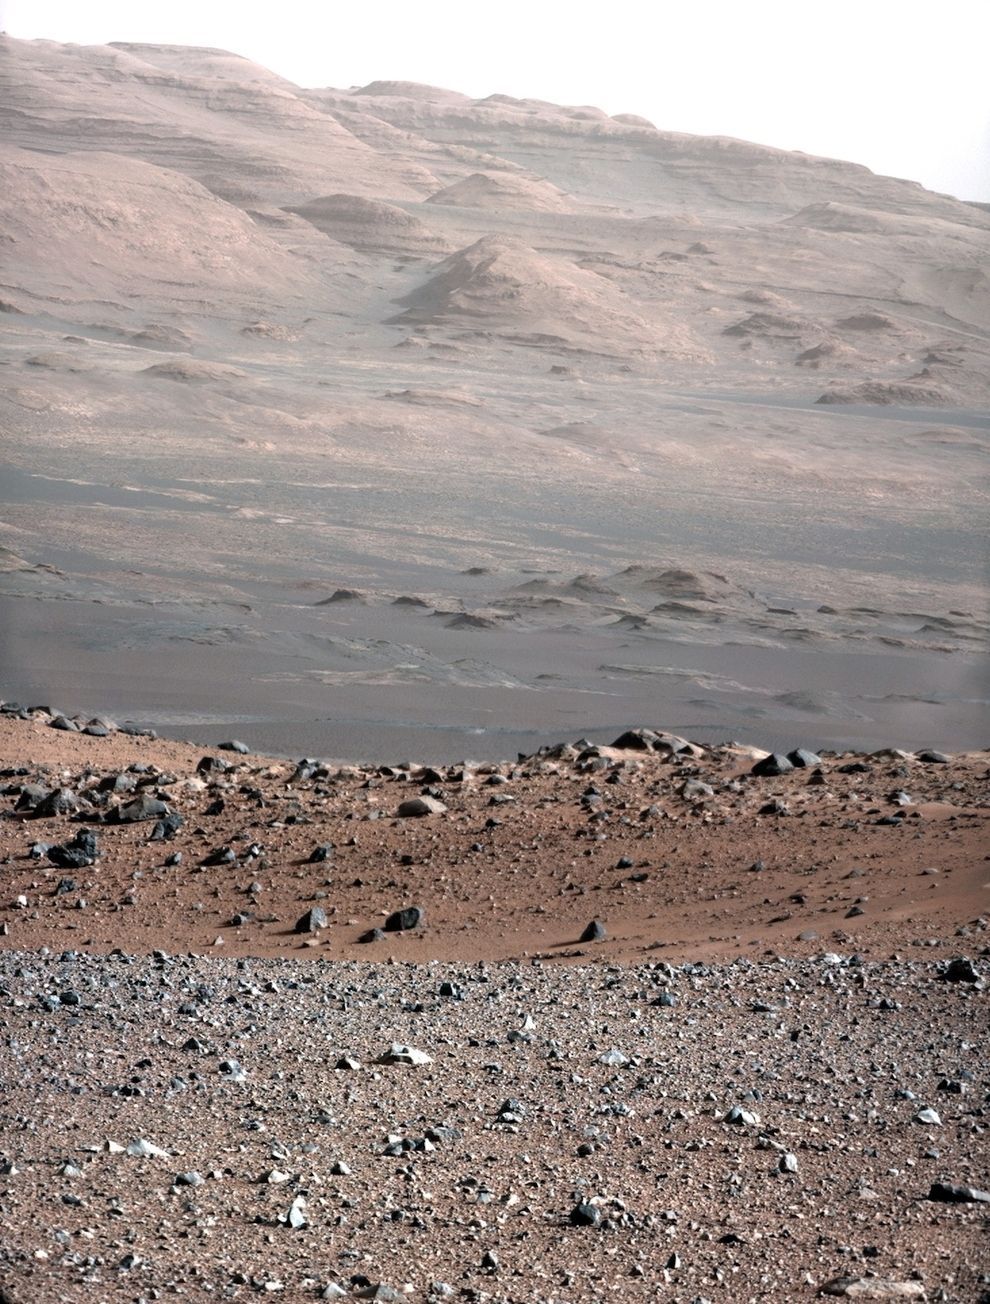 The Clearest Images Of Another Planet You’ve Ever Seen    Now that the Curiosity rover is good and settled, it’s starting to take